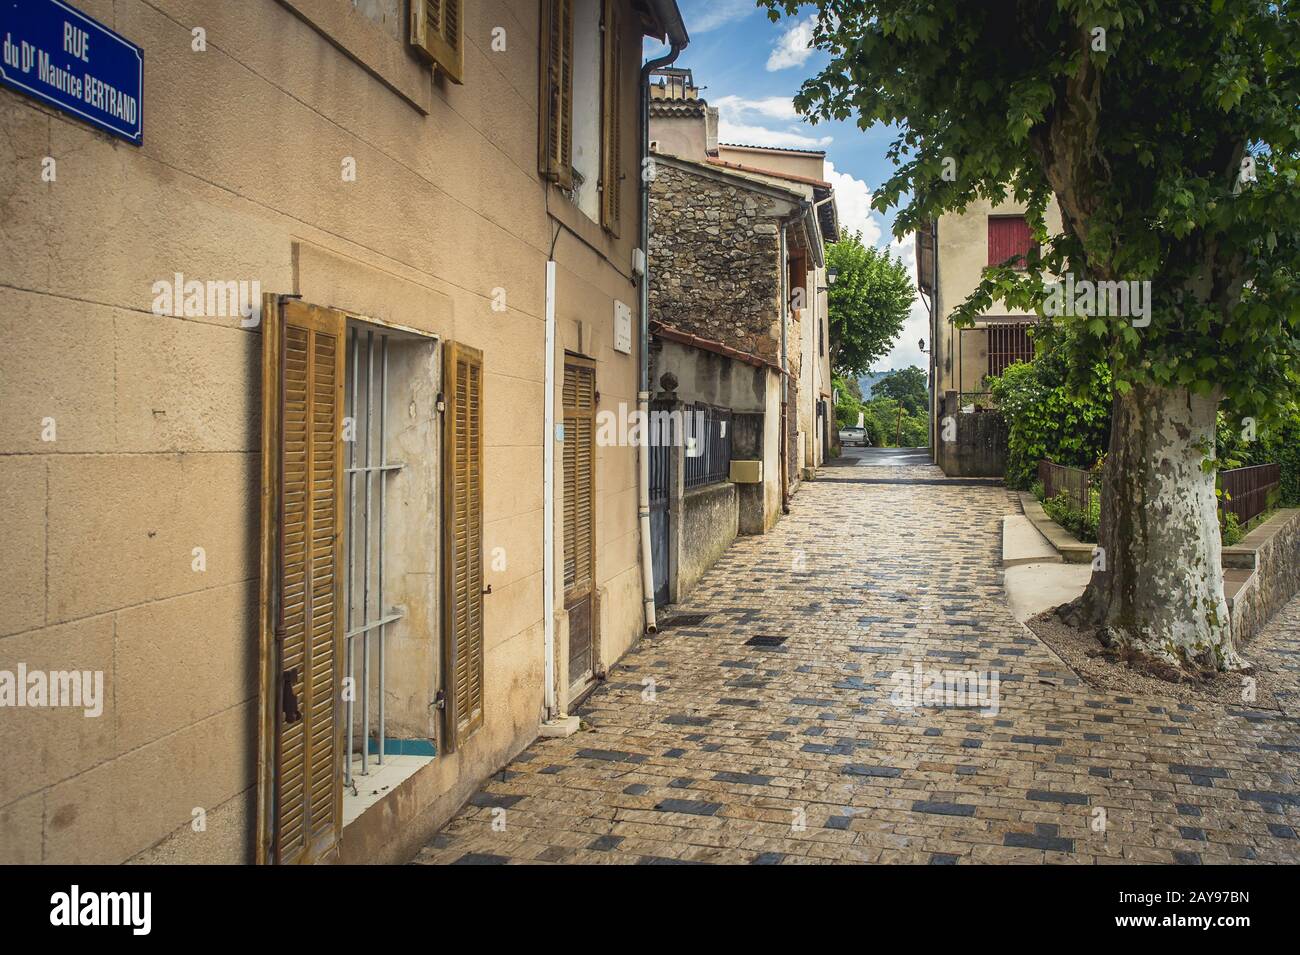 Sunday rest in the streets of Picasso's place of work. Vauvenargues. Stock Photo